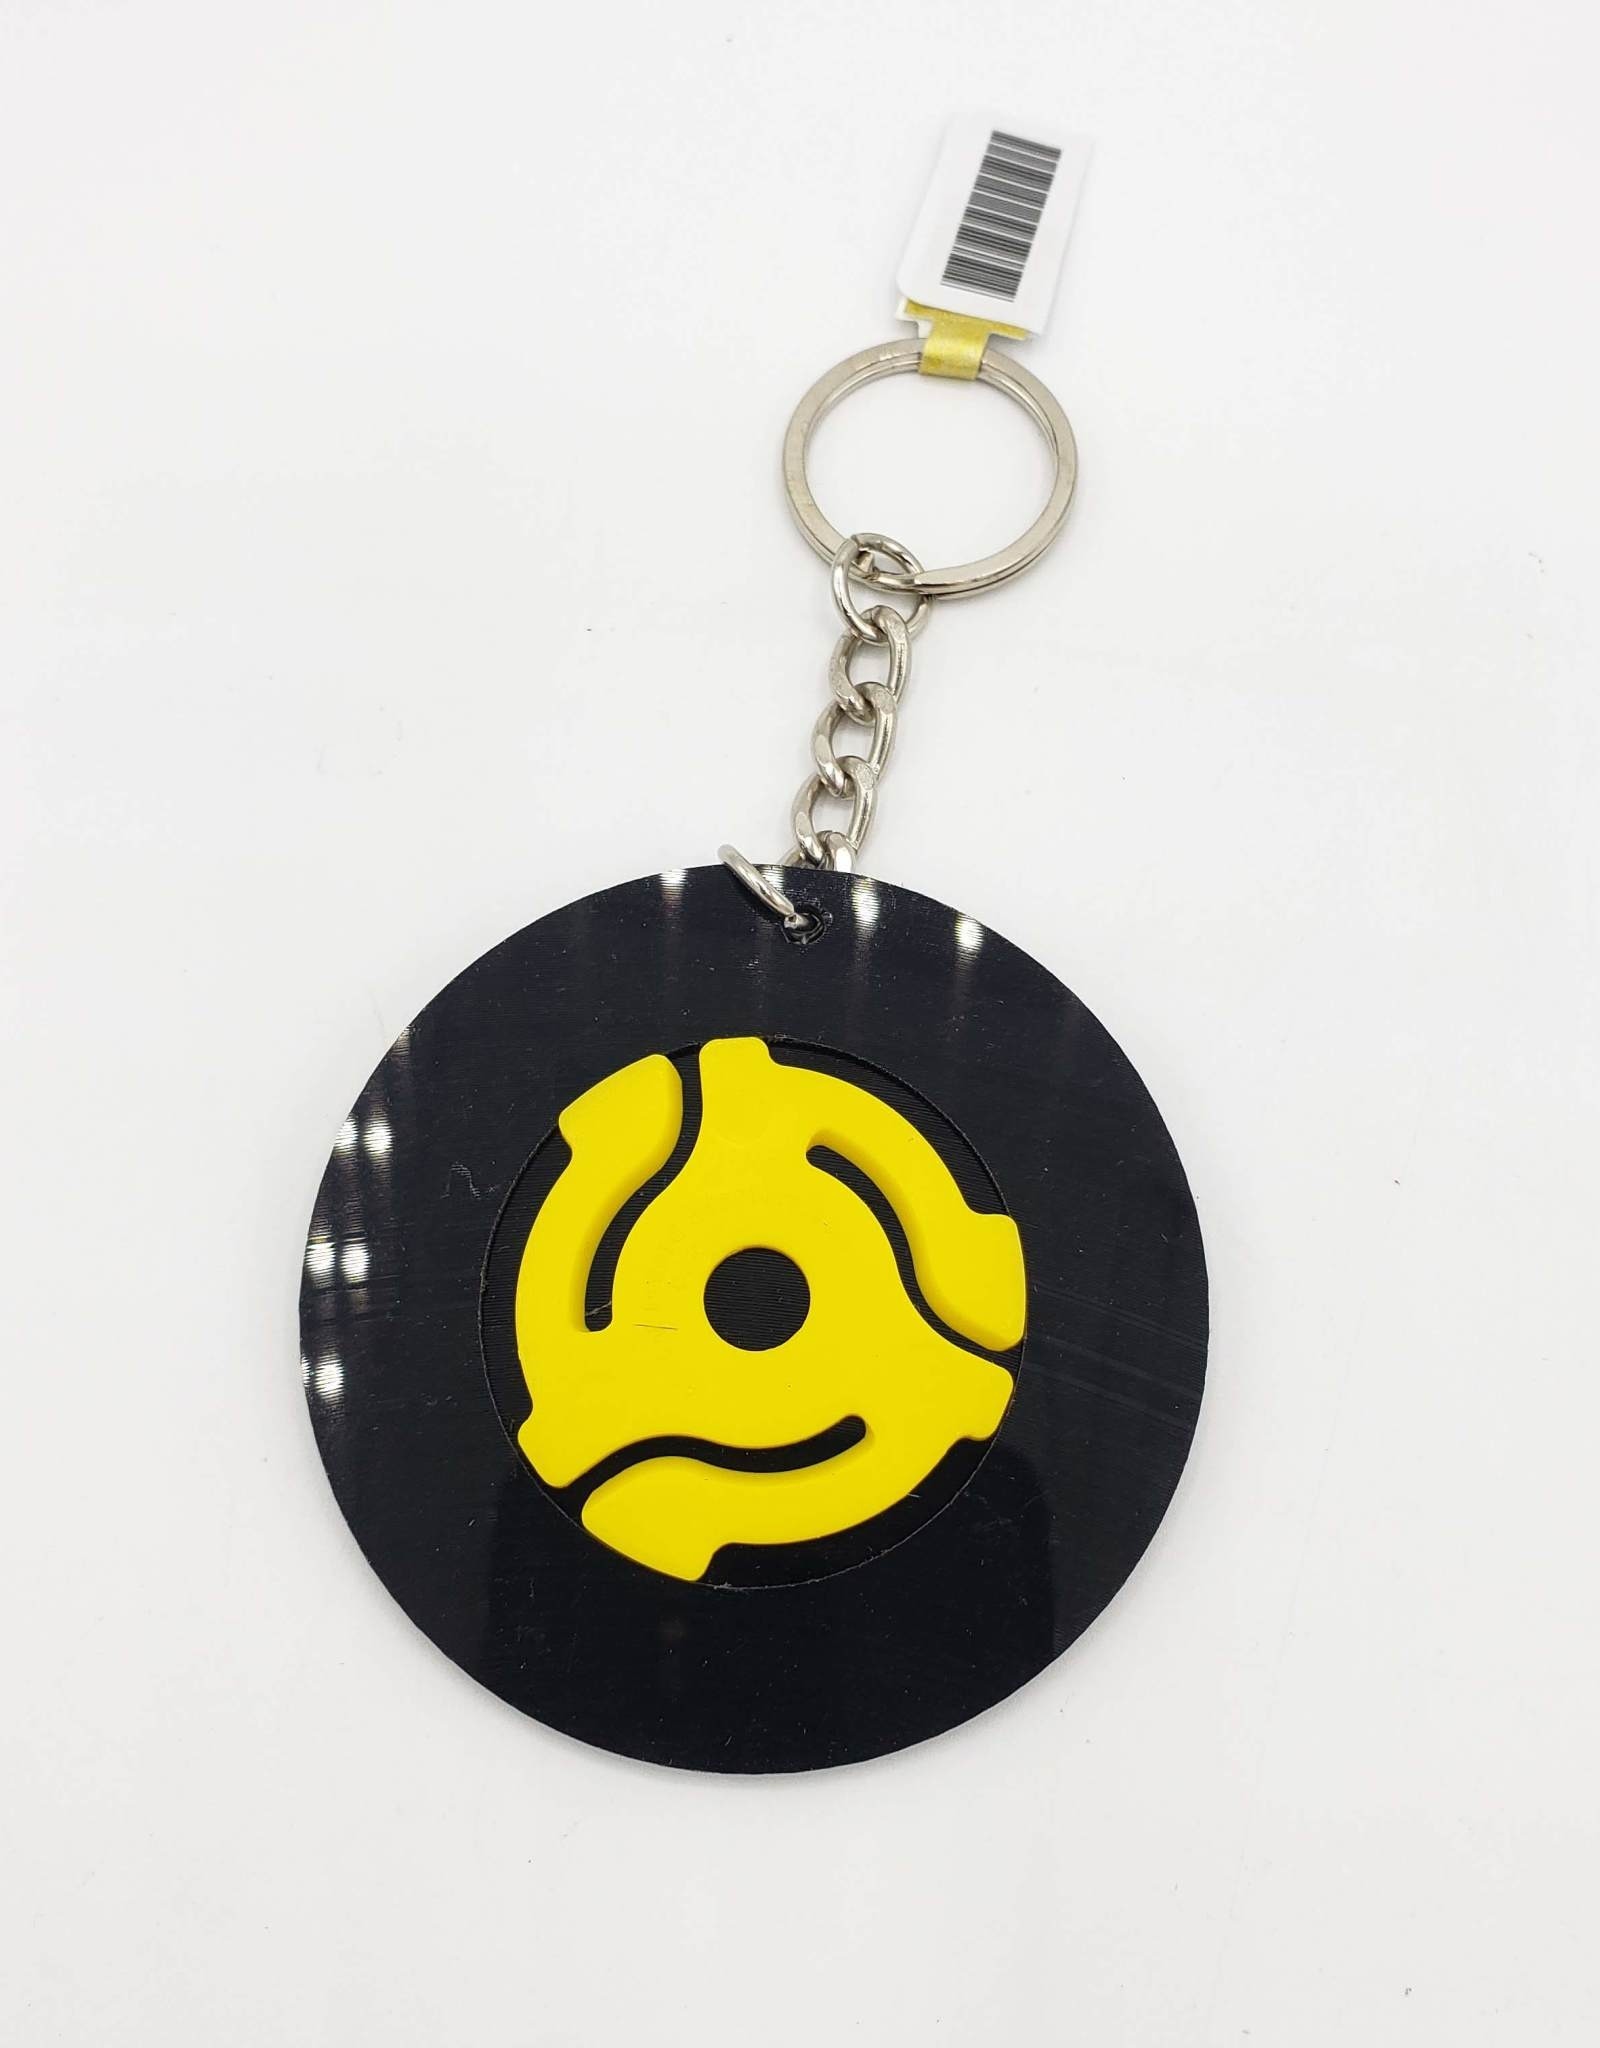 Keychain Vintage Recycled Record - Vinylux